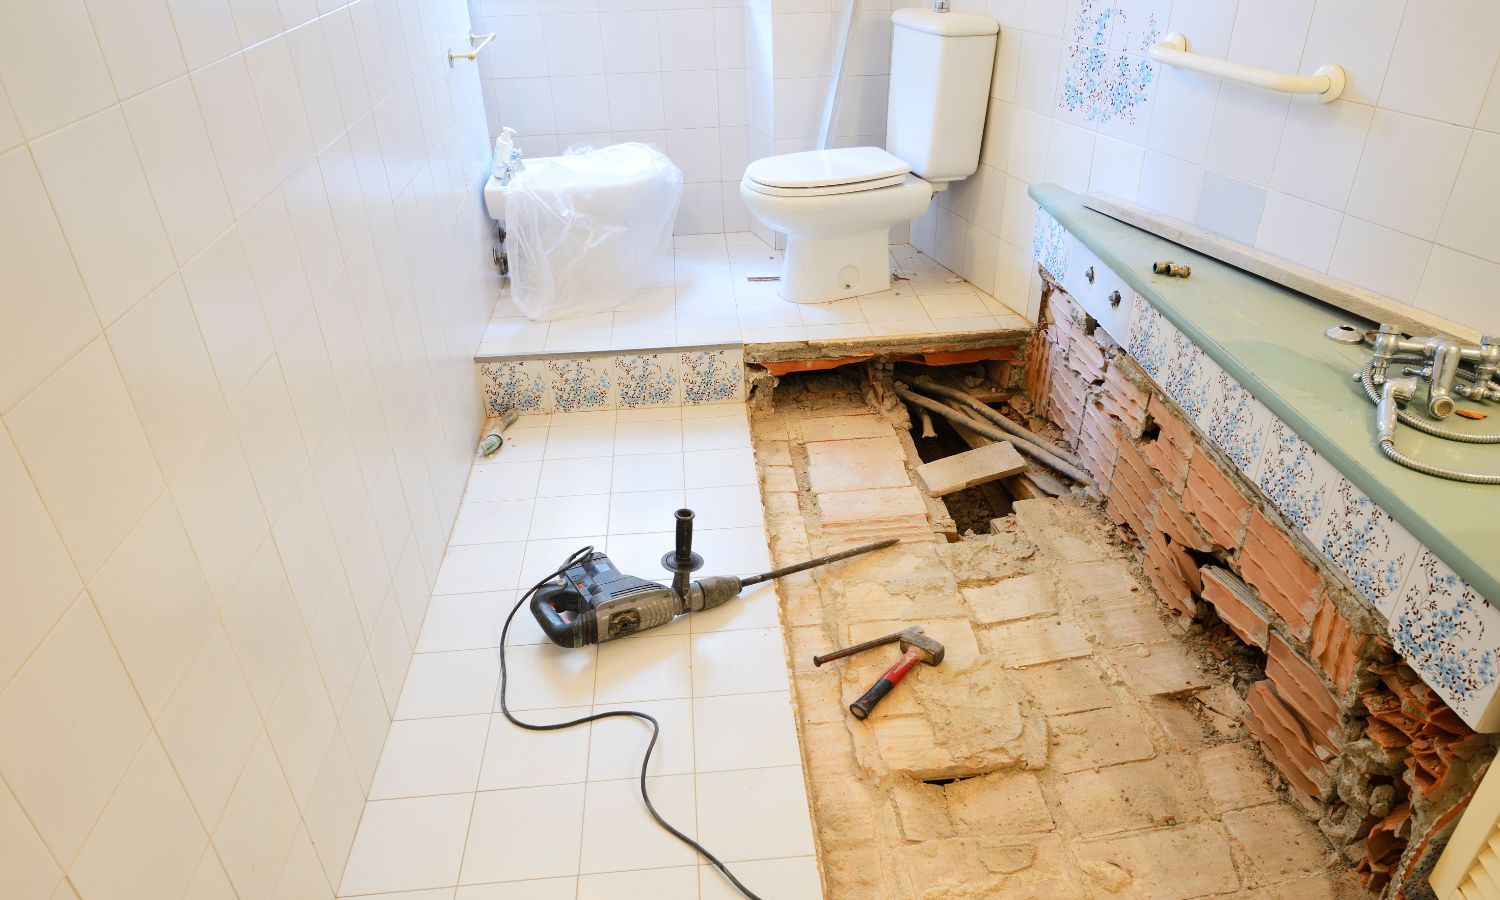 Finding the Right Bathroom Remodeling Contractor